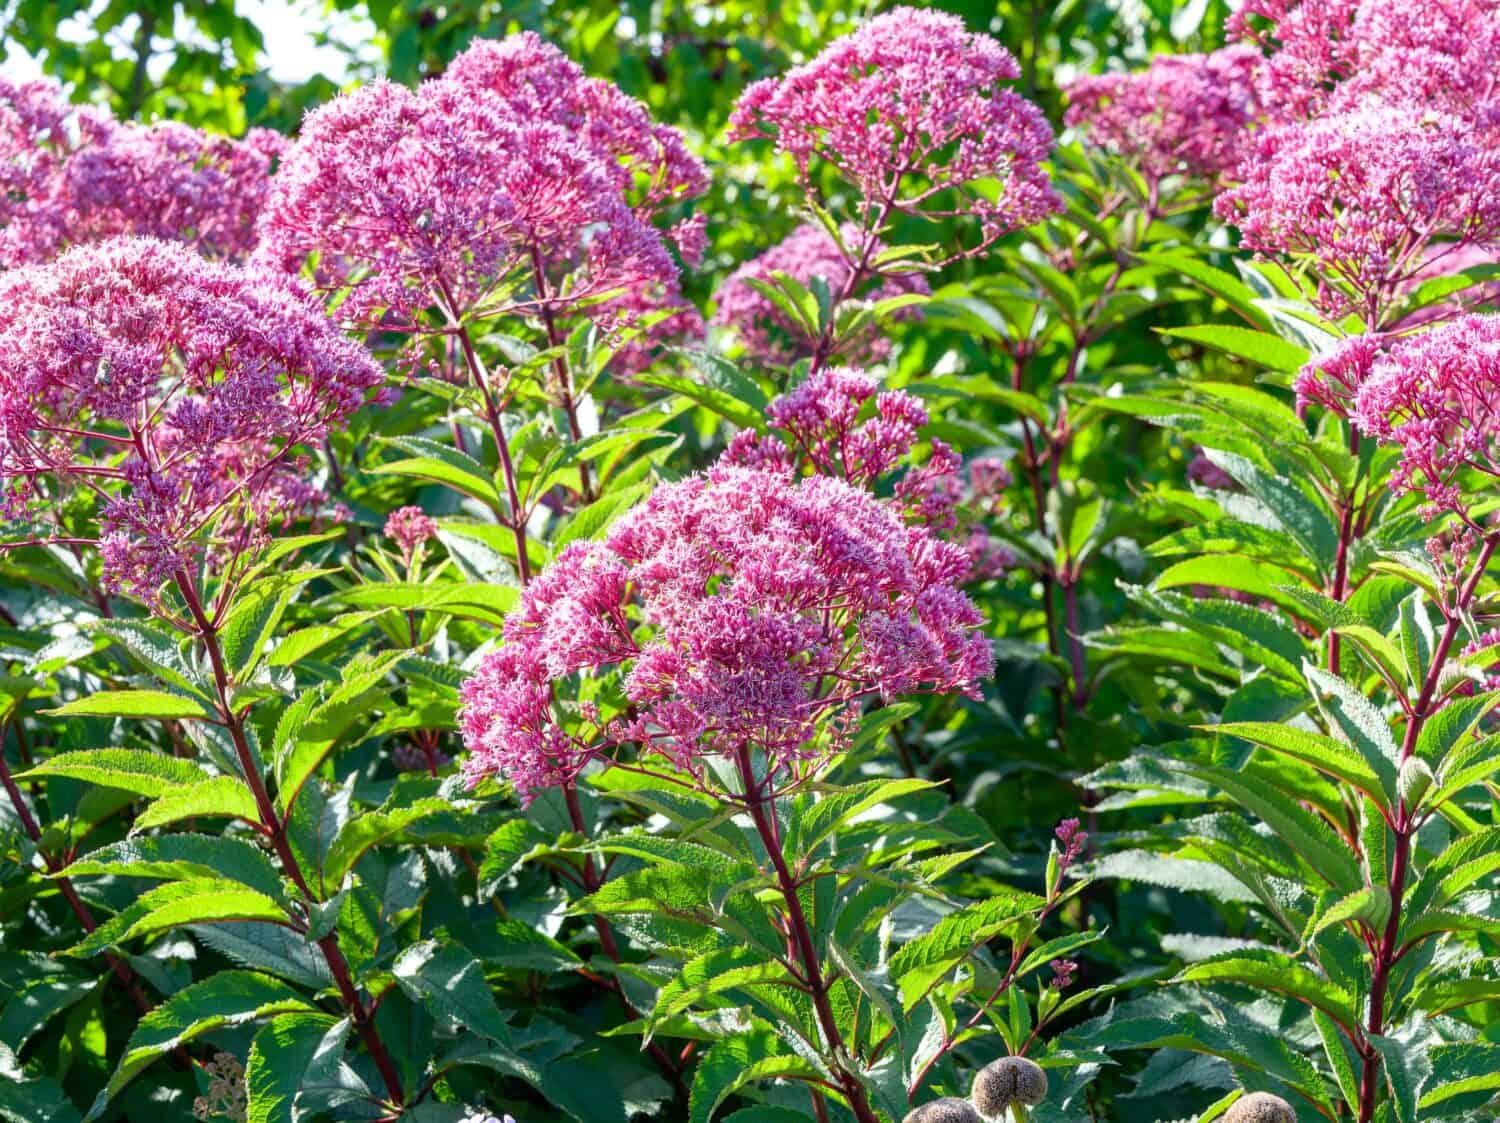 Eupatorium cannabinum | Hemp-agrimony or holy rope. Herbaceous plant with racemes of whitish to pale dusty pink flower heads, tiny and fluffy at top of purplish to dark red hairy stems